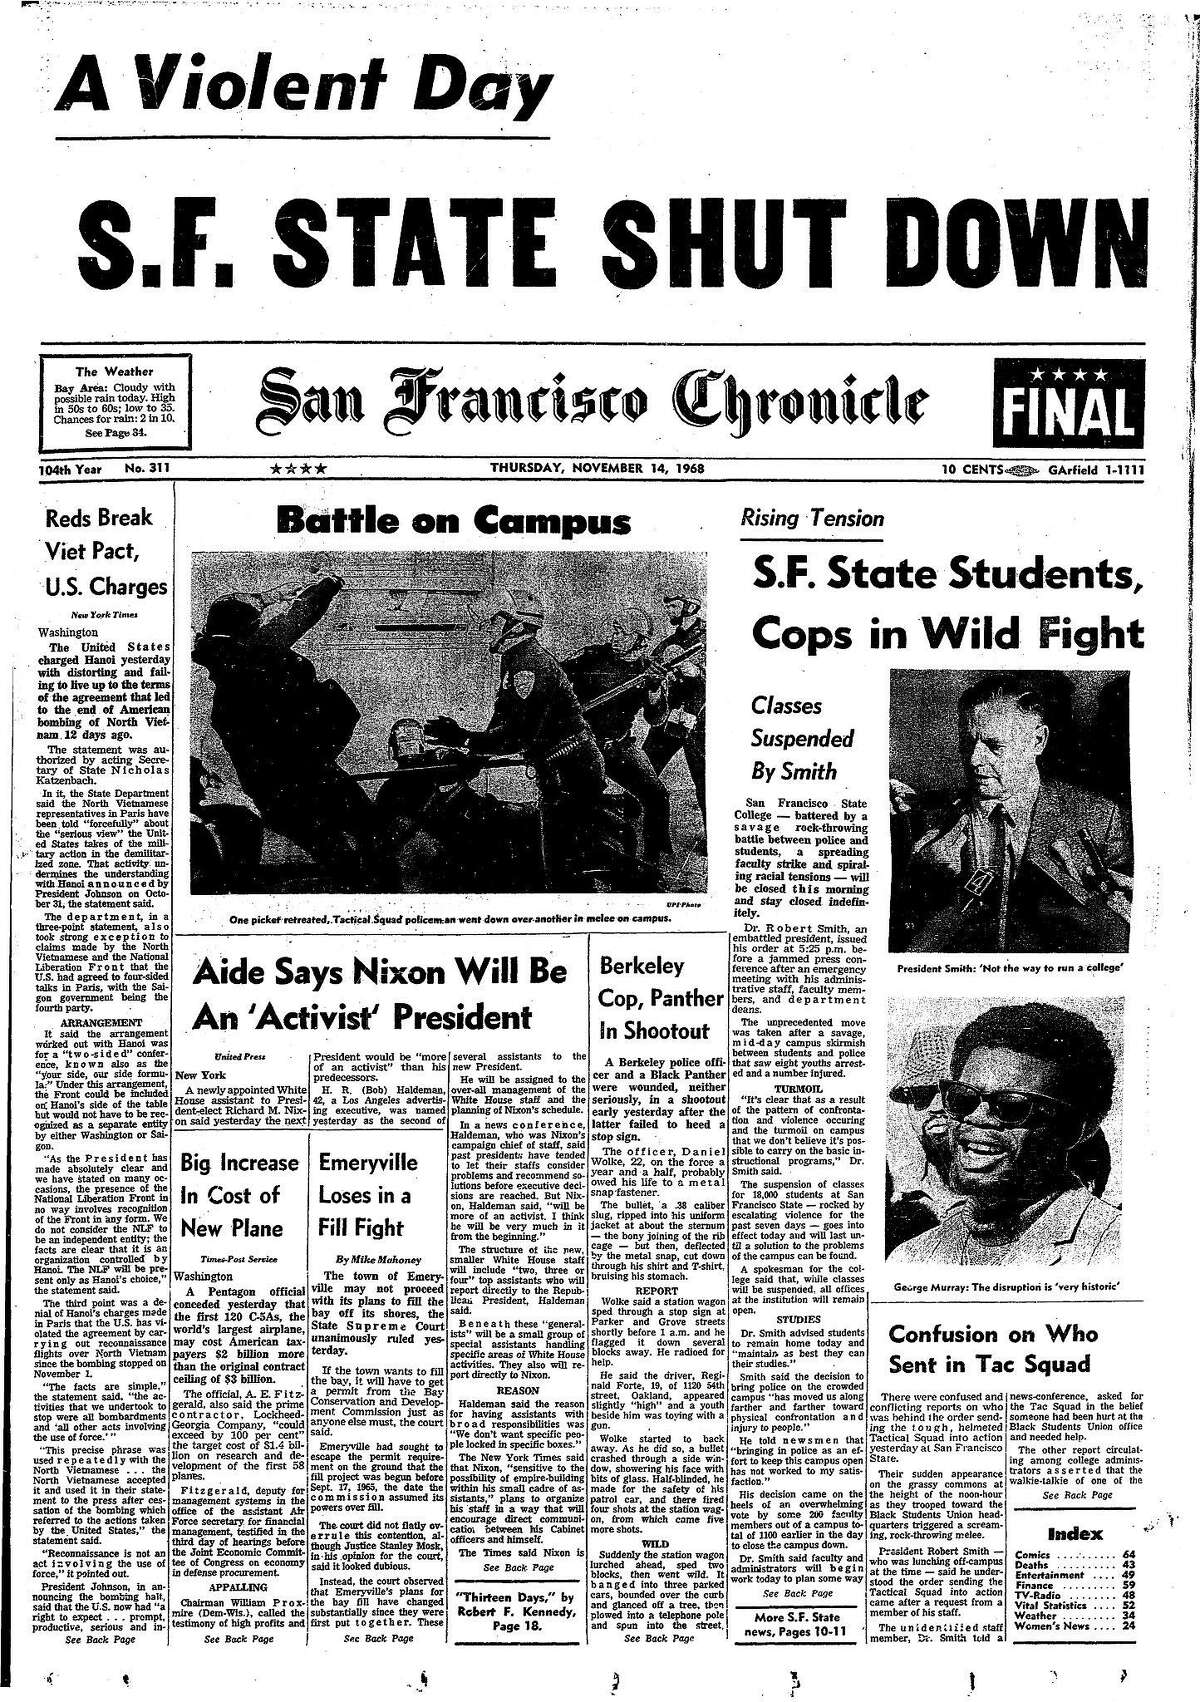 How SF State’s bloody strikes changed academia and nation 50 years ago